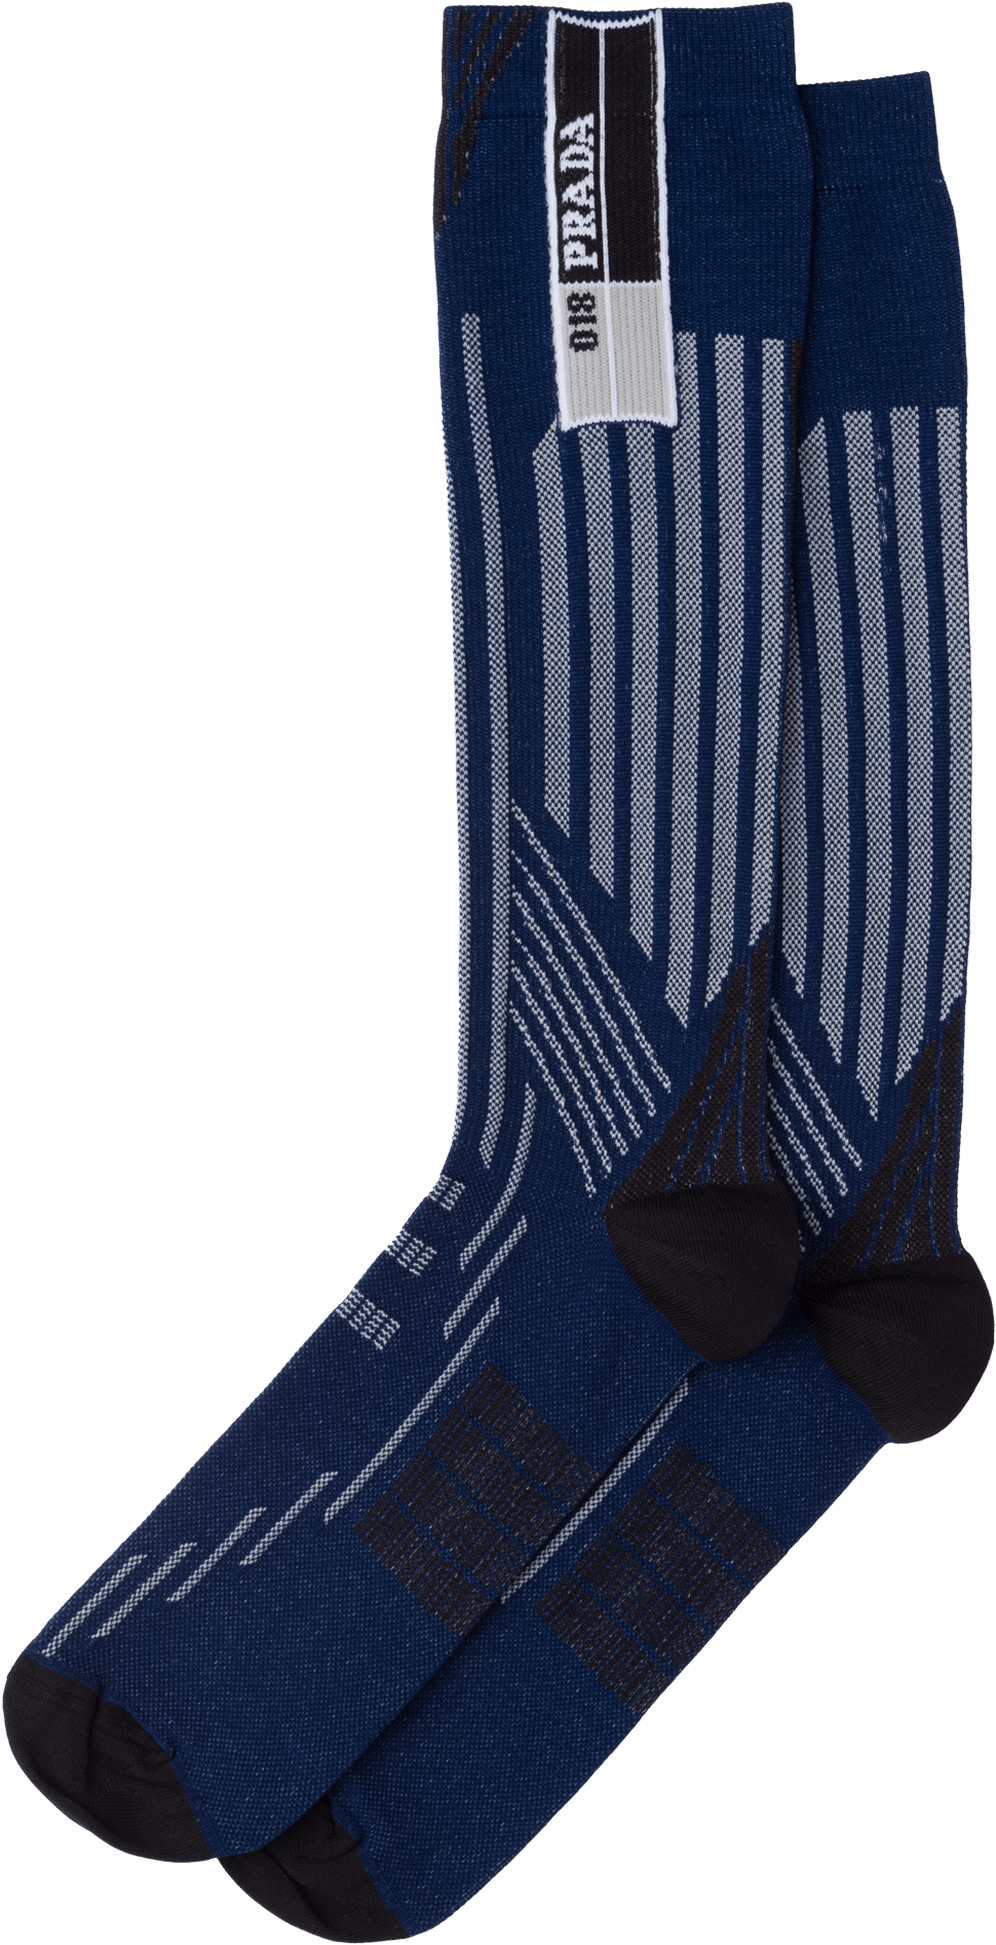 Download Hockey Sock PNG Image with No Background - PNGkey.com